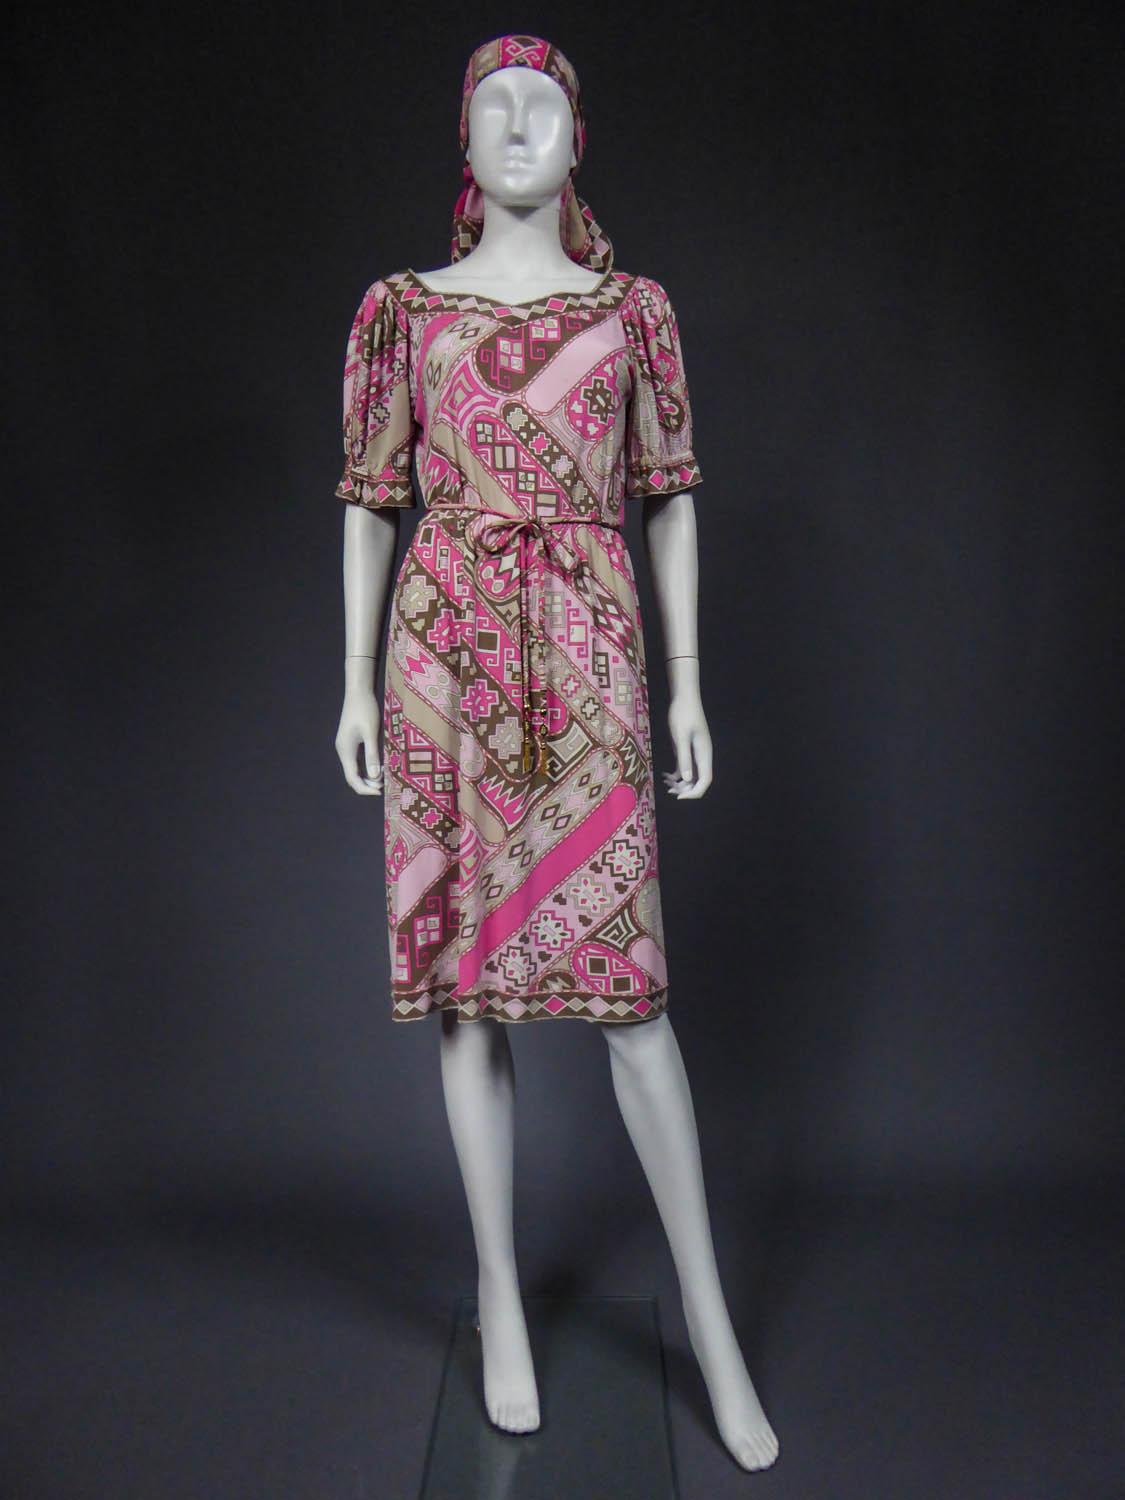 Circa 1970
Italy

Emilio Pucci summer dress in printed silk jersey with psychedelic patterns in shades of pink, light pink, white, beige and brown dating from the end of the 1960s. Dress tightened at the waist and accompanied by a matching